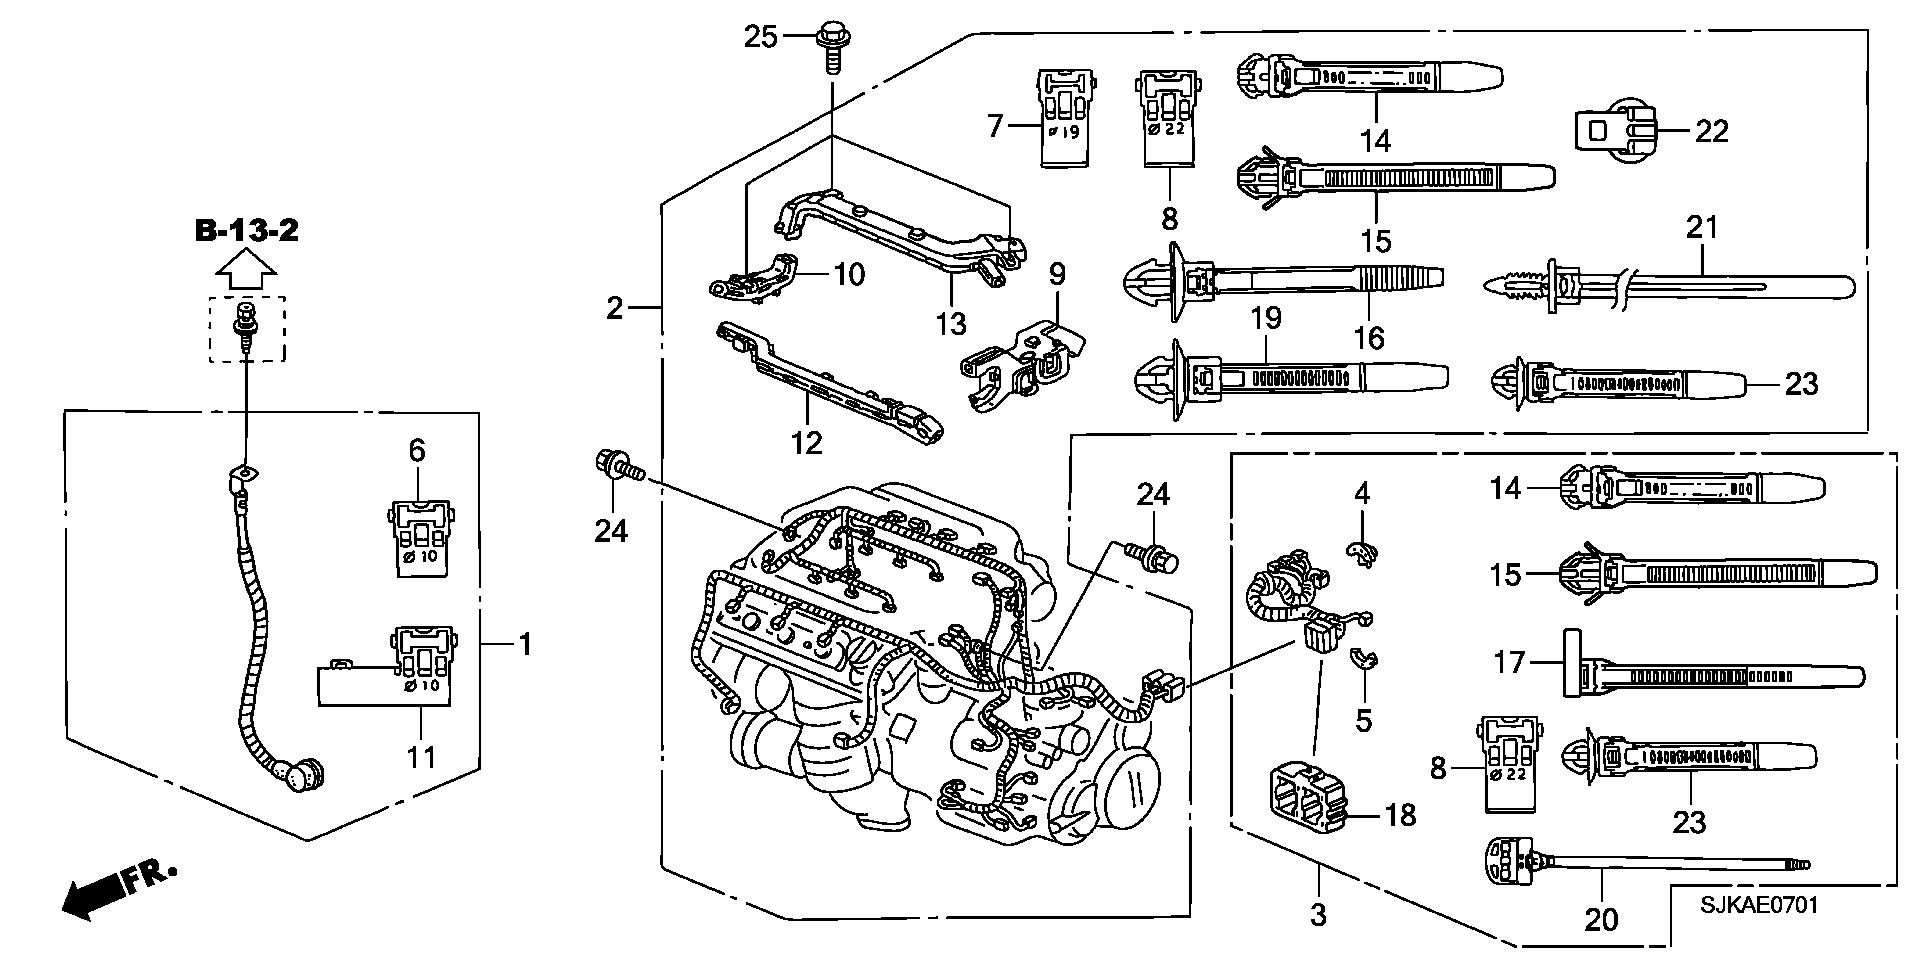 ENGINE WIRE HARNESS(V6)